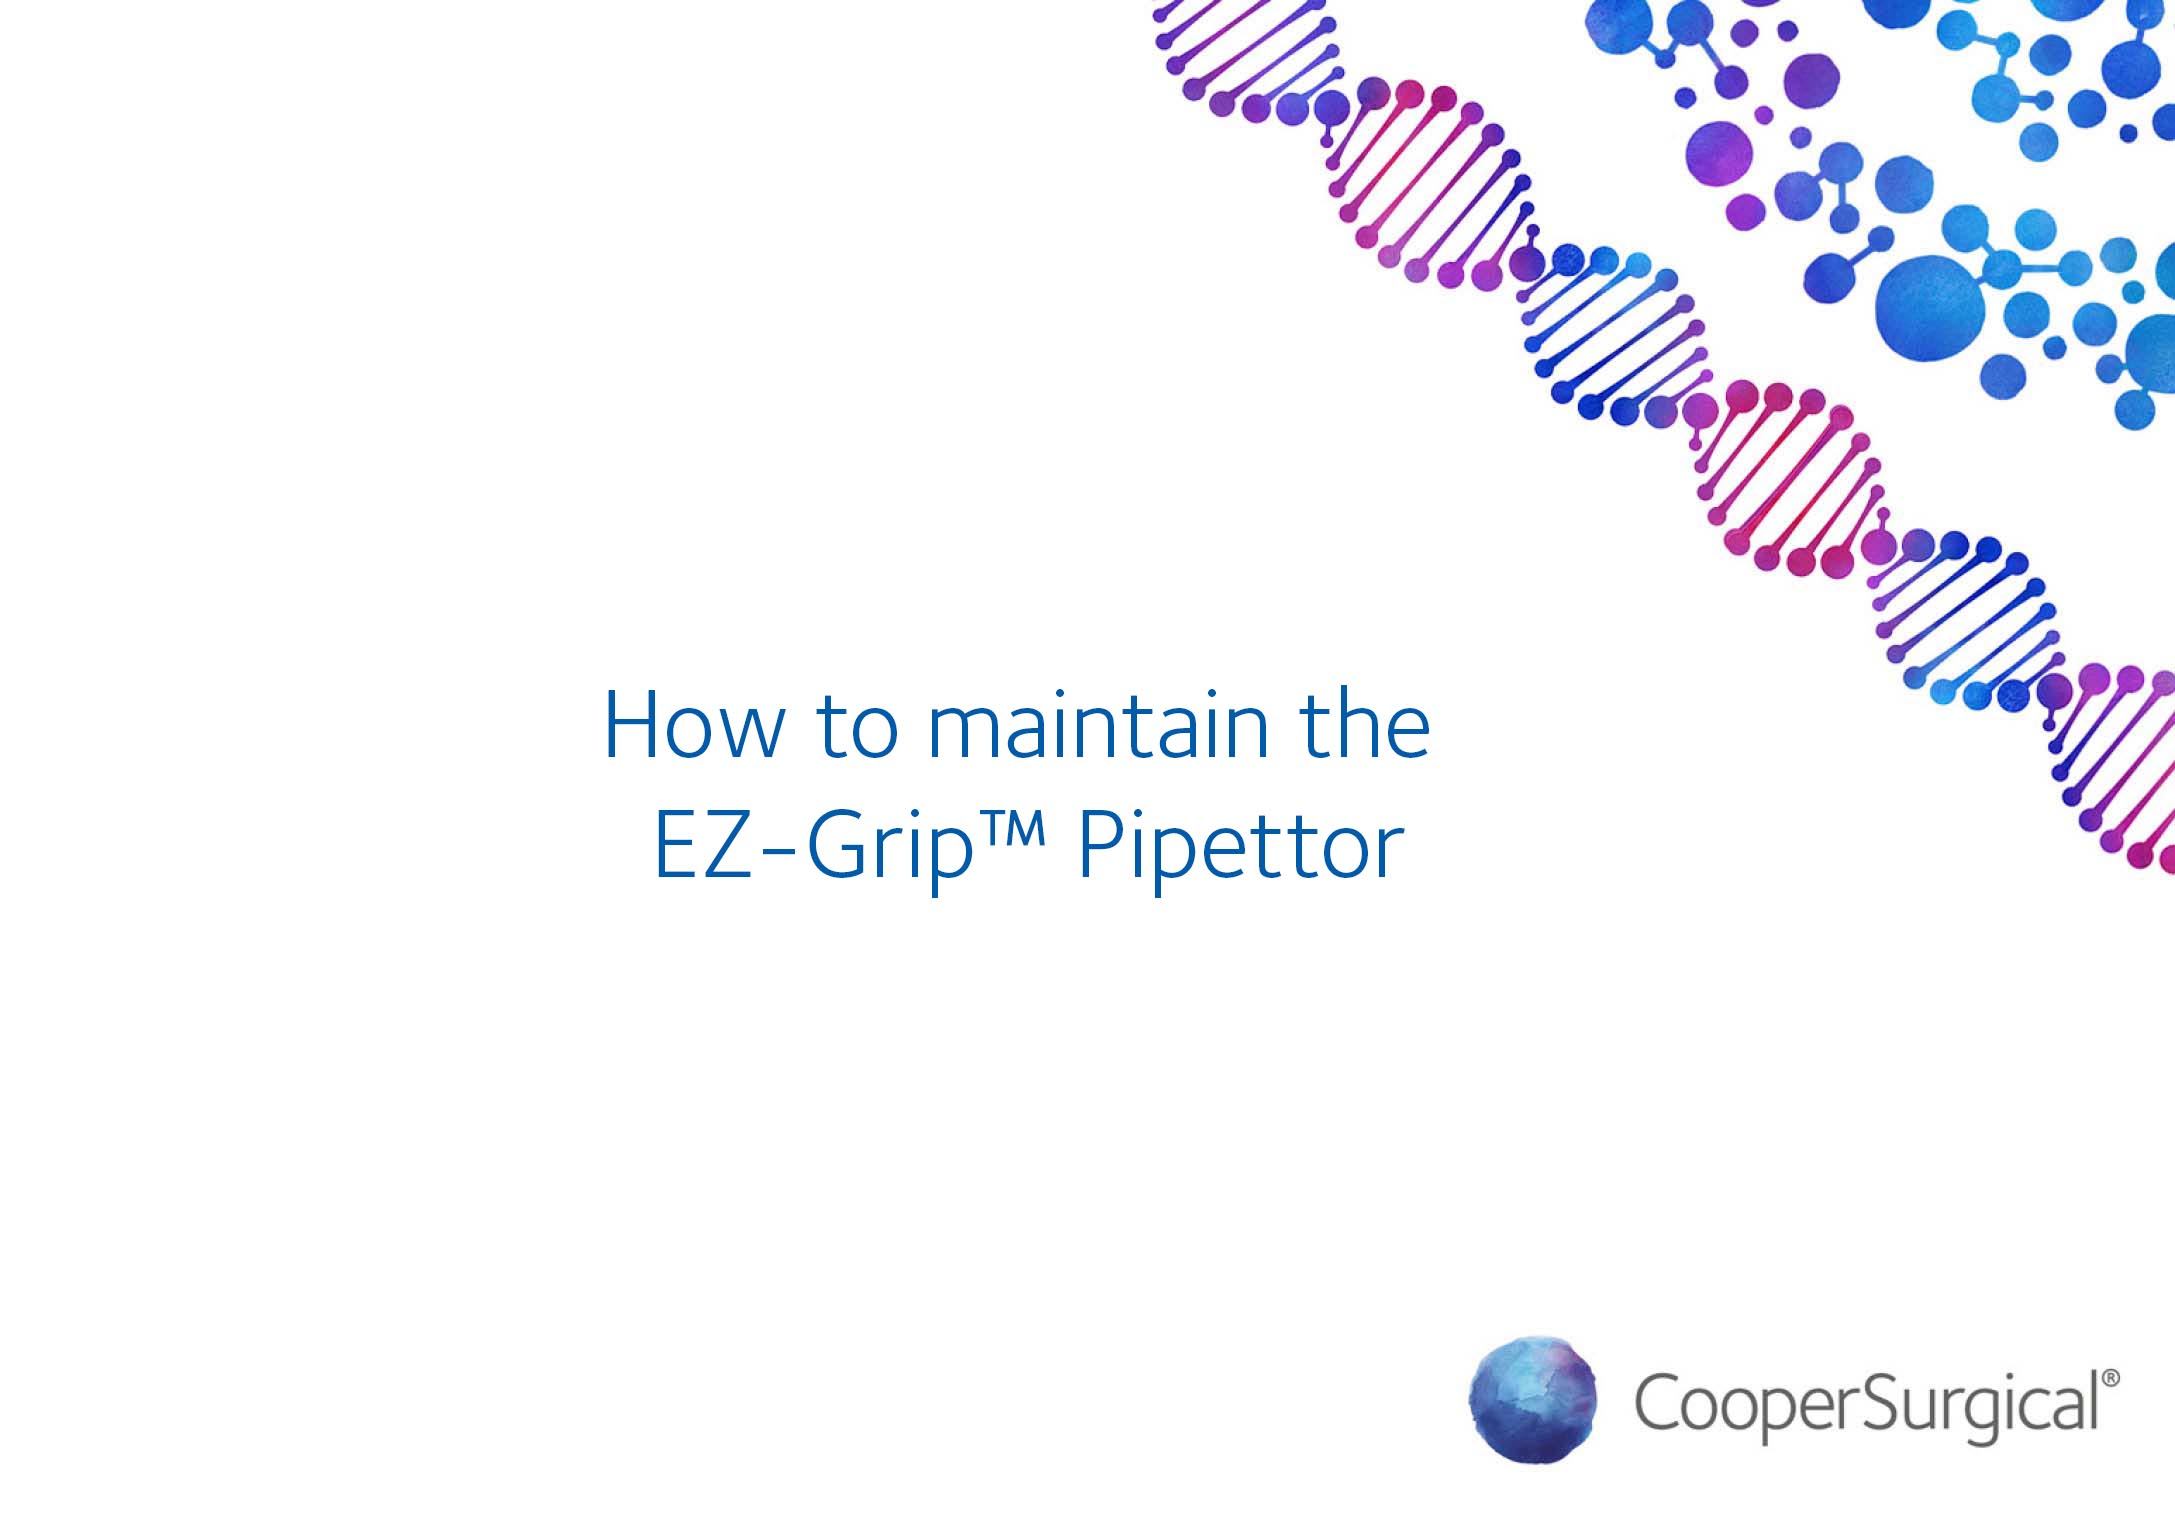 How to maintain the EZ-Grip™ Pipettor